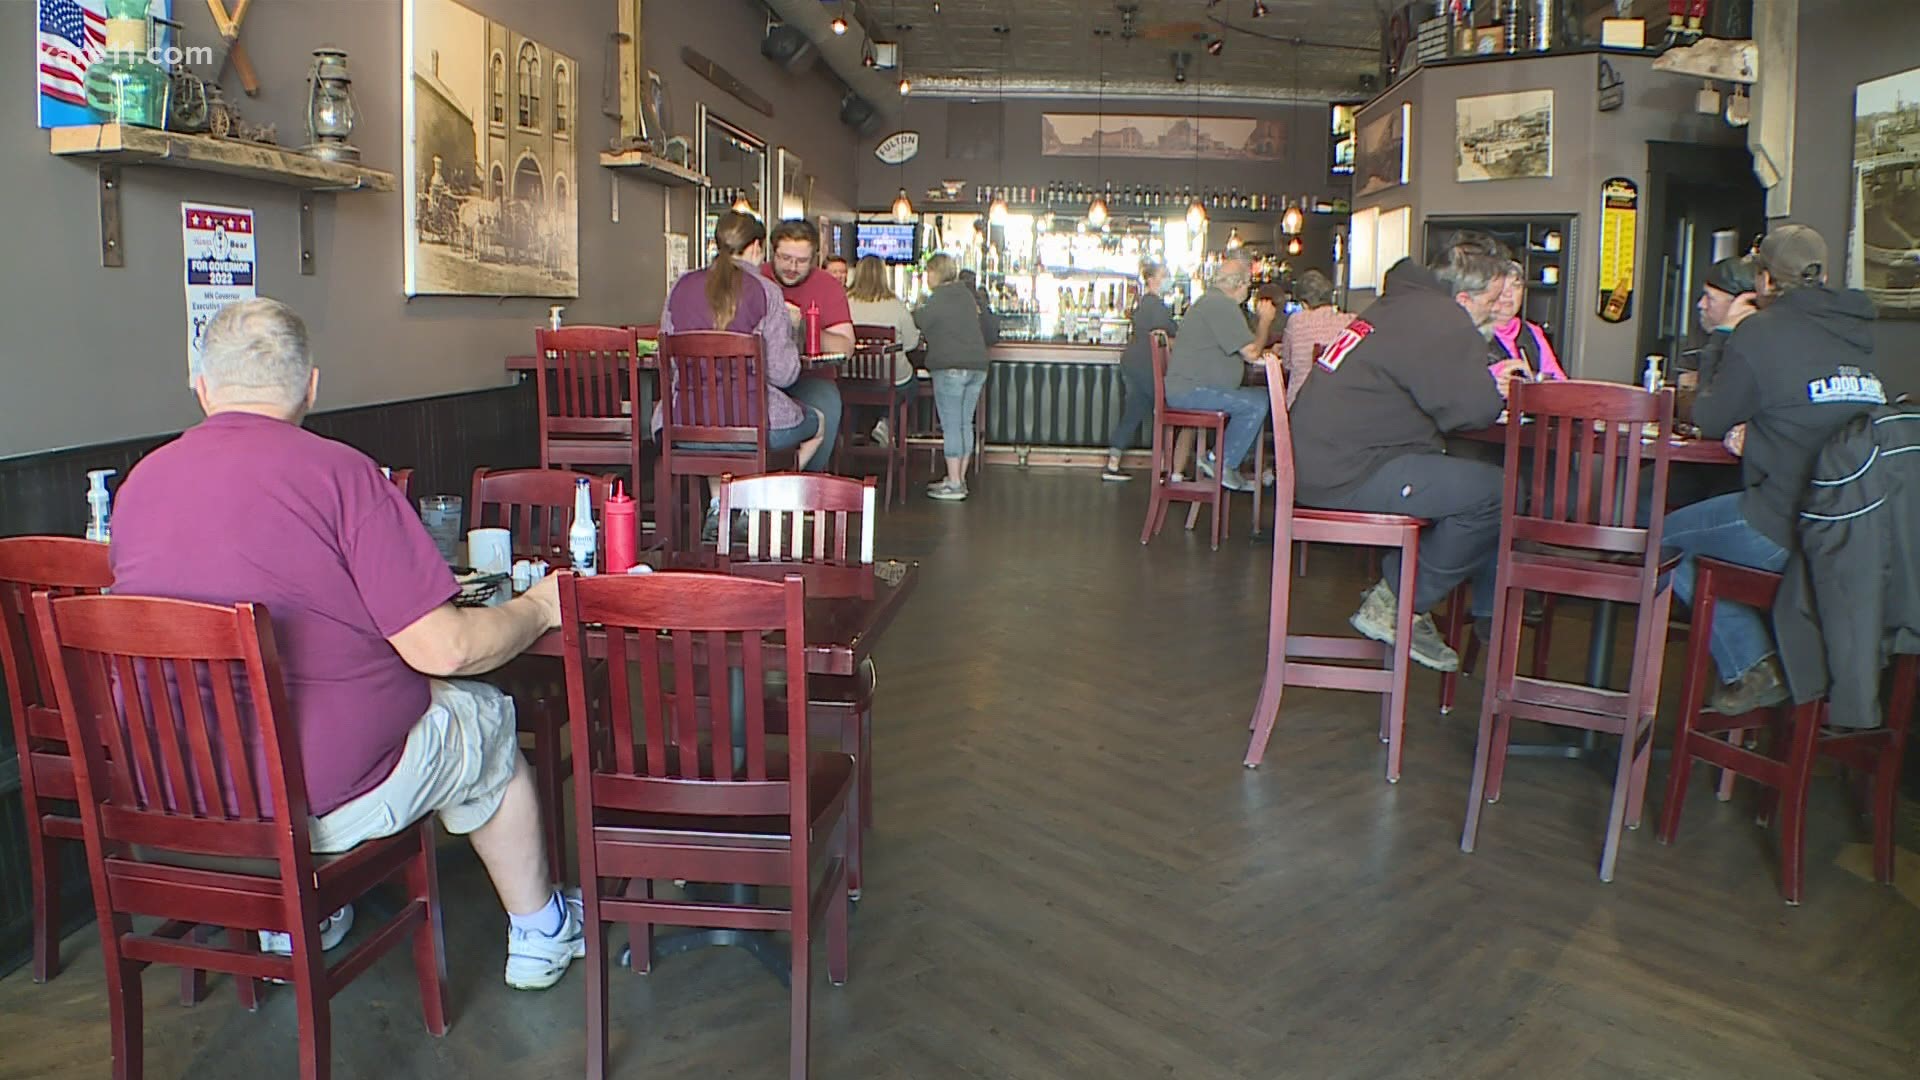 The state has fined a Hastings bar and grill $7000 for an employee mask violation and the owner plans to fight it